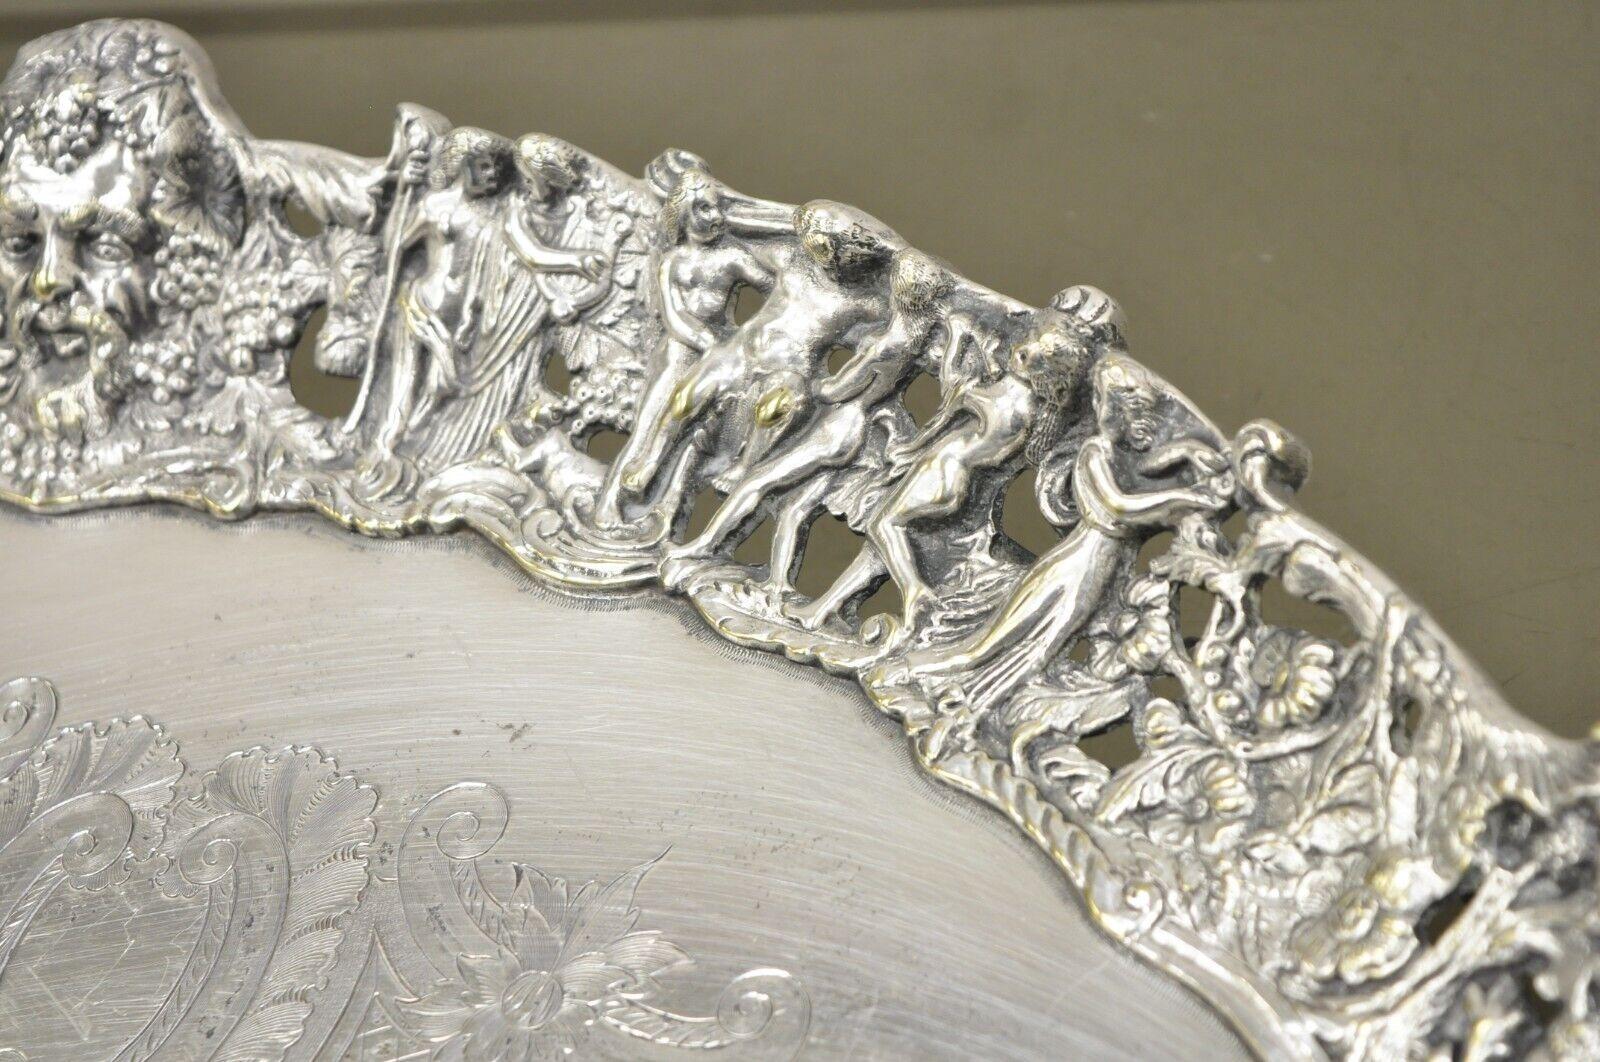 French Renaissance Bacchanal Scene Silver Plated Bacchus Figural Salver Tray For Sale 9